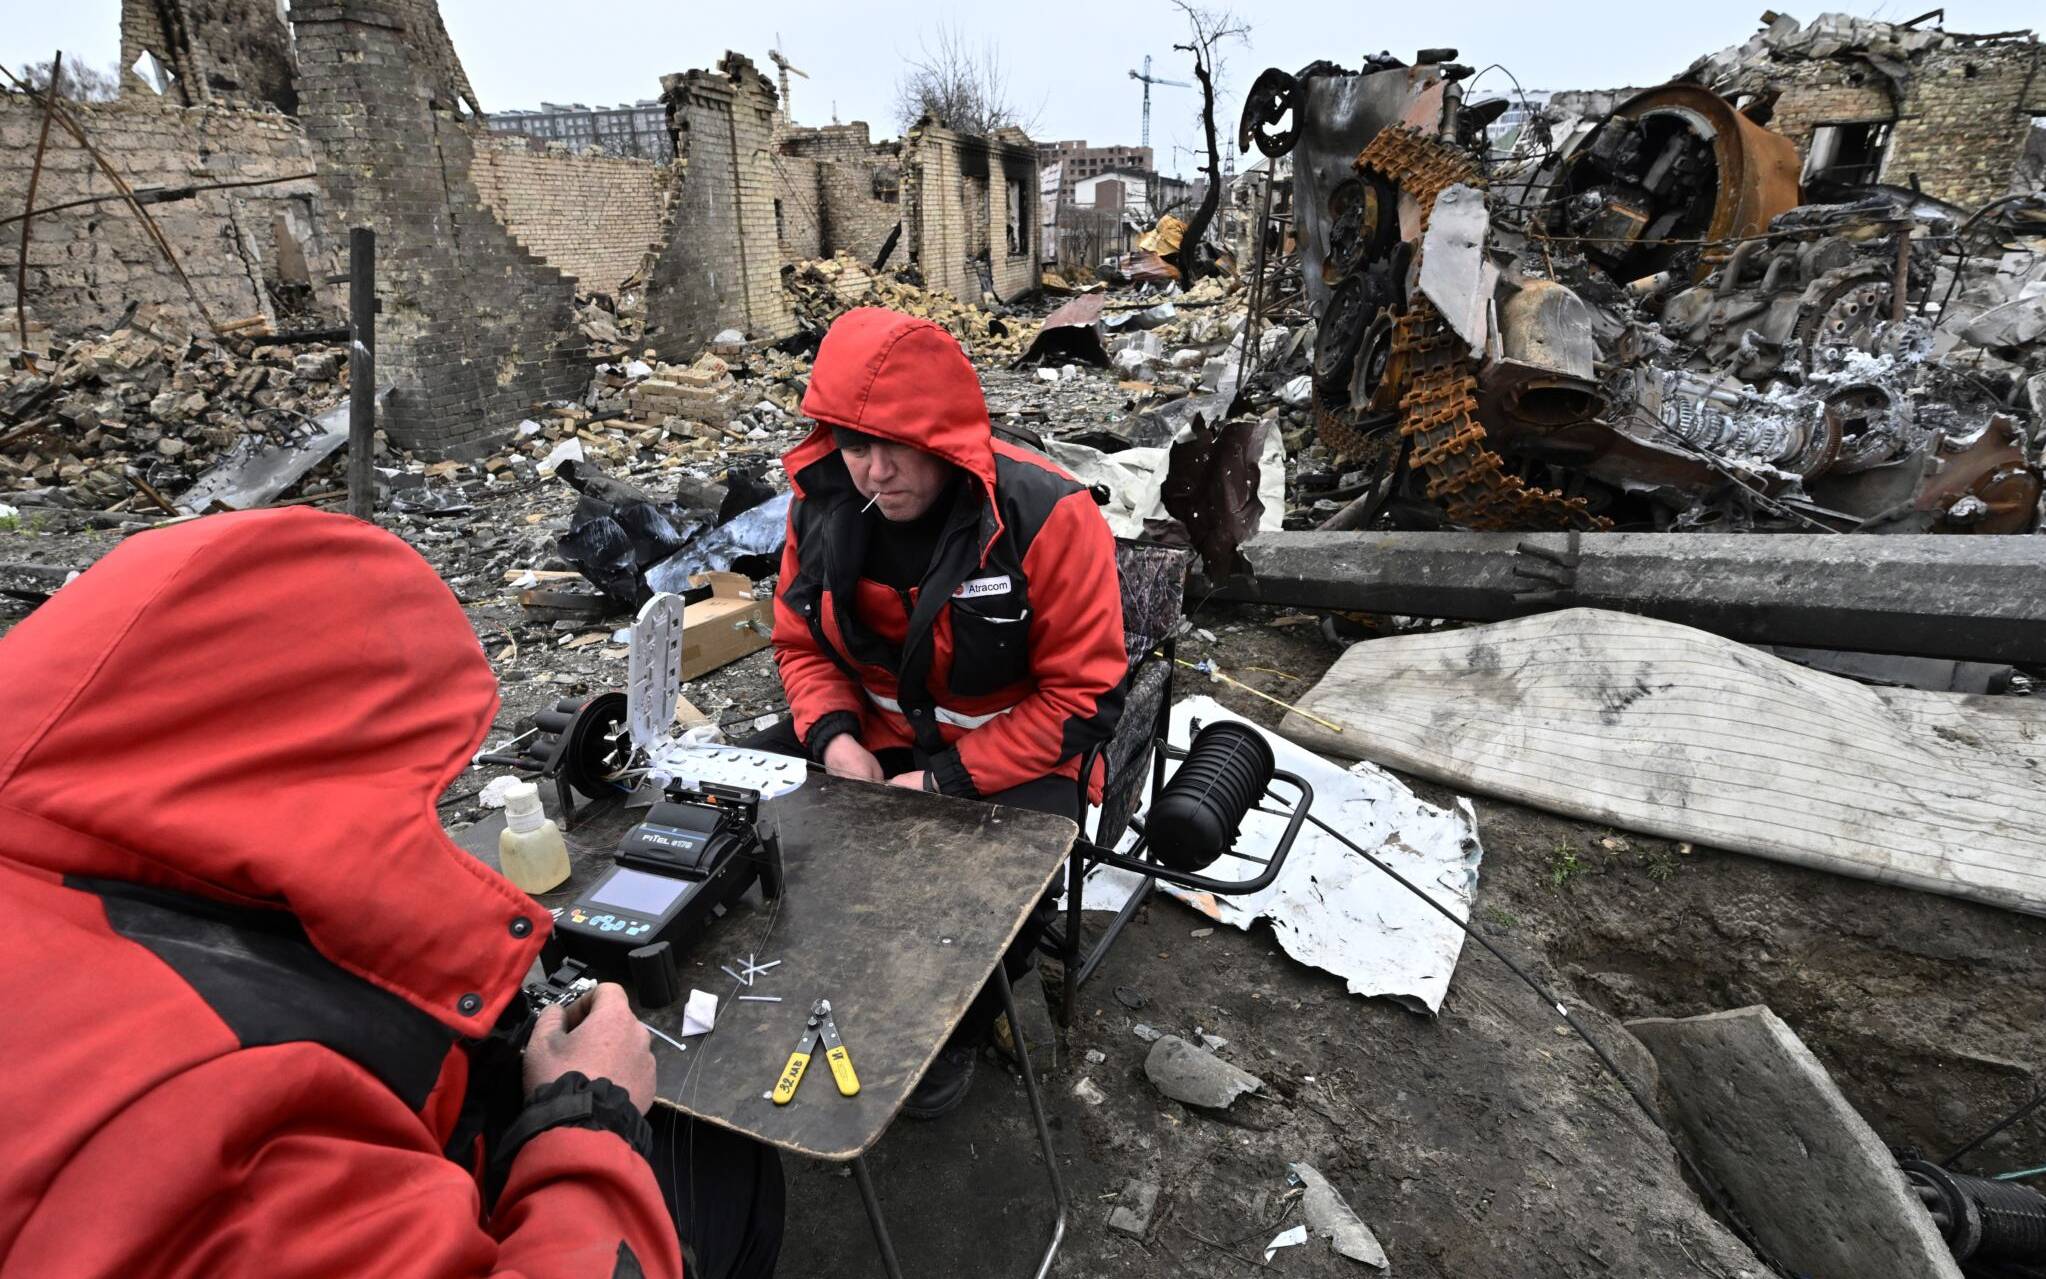 Repairmen restore local communication cables among the debris of destroyed armoured vehicles and buildings on a street in the town of Bucha, on the outskirts of the Ukrainian capital Kyiv on April 5, 2022. (Photo by Genya SAVILOV / AFP)